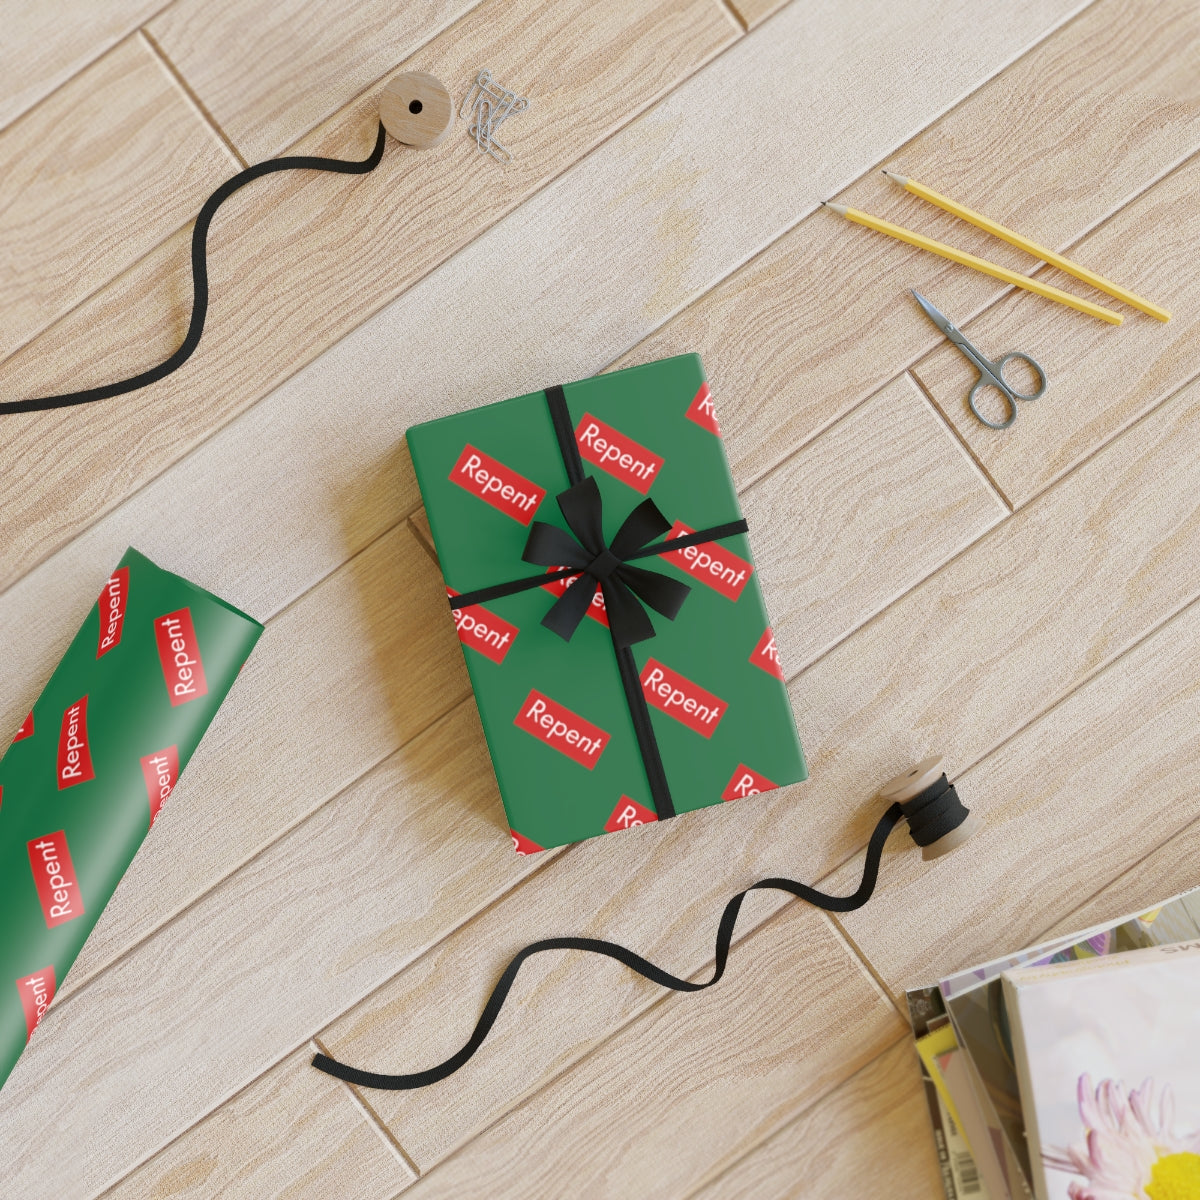 Repent Christmas Gift Wrapping Paper